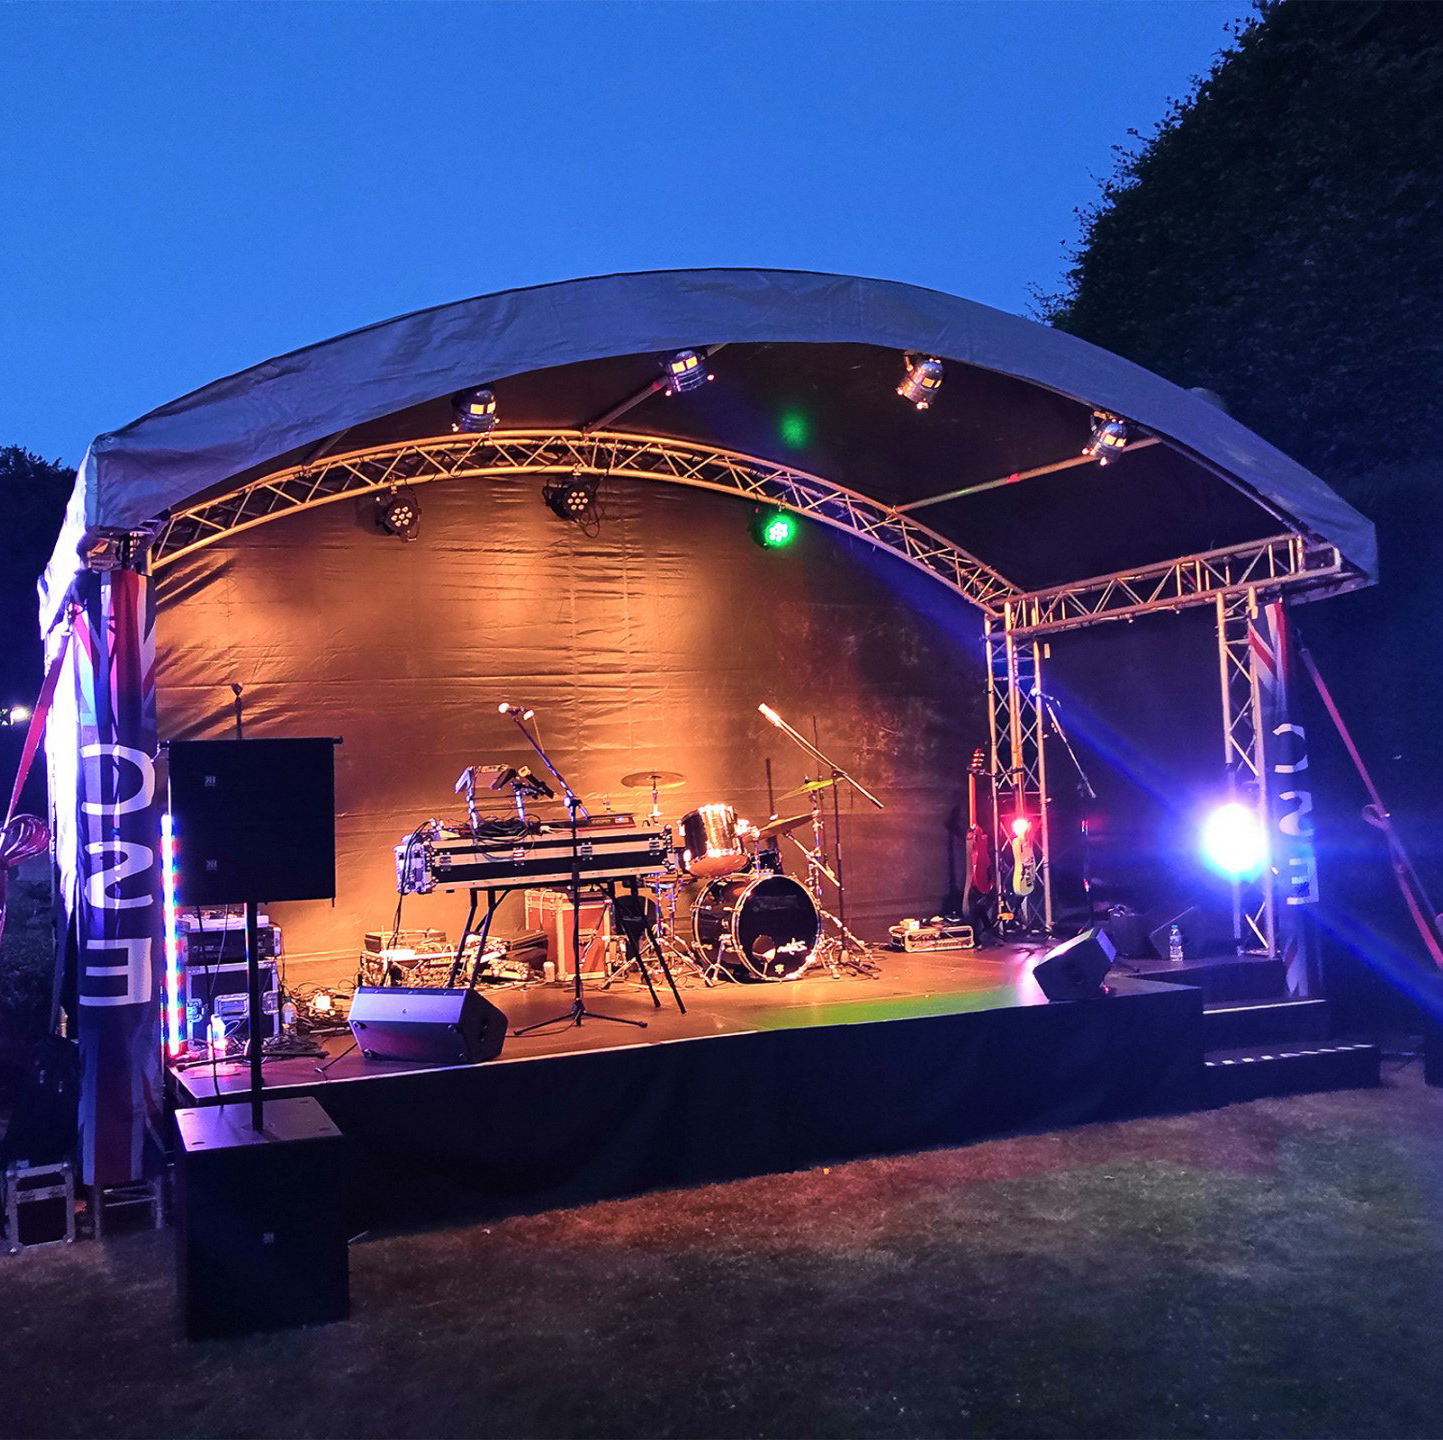 Arc stage set up on the evening with coloured lighting and PA system